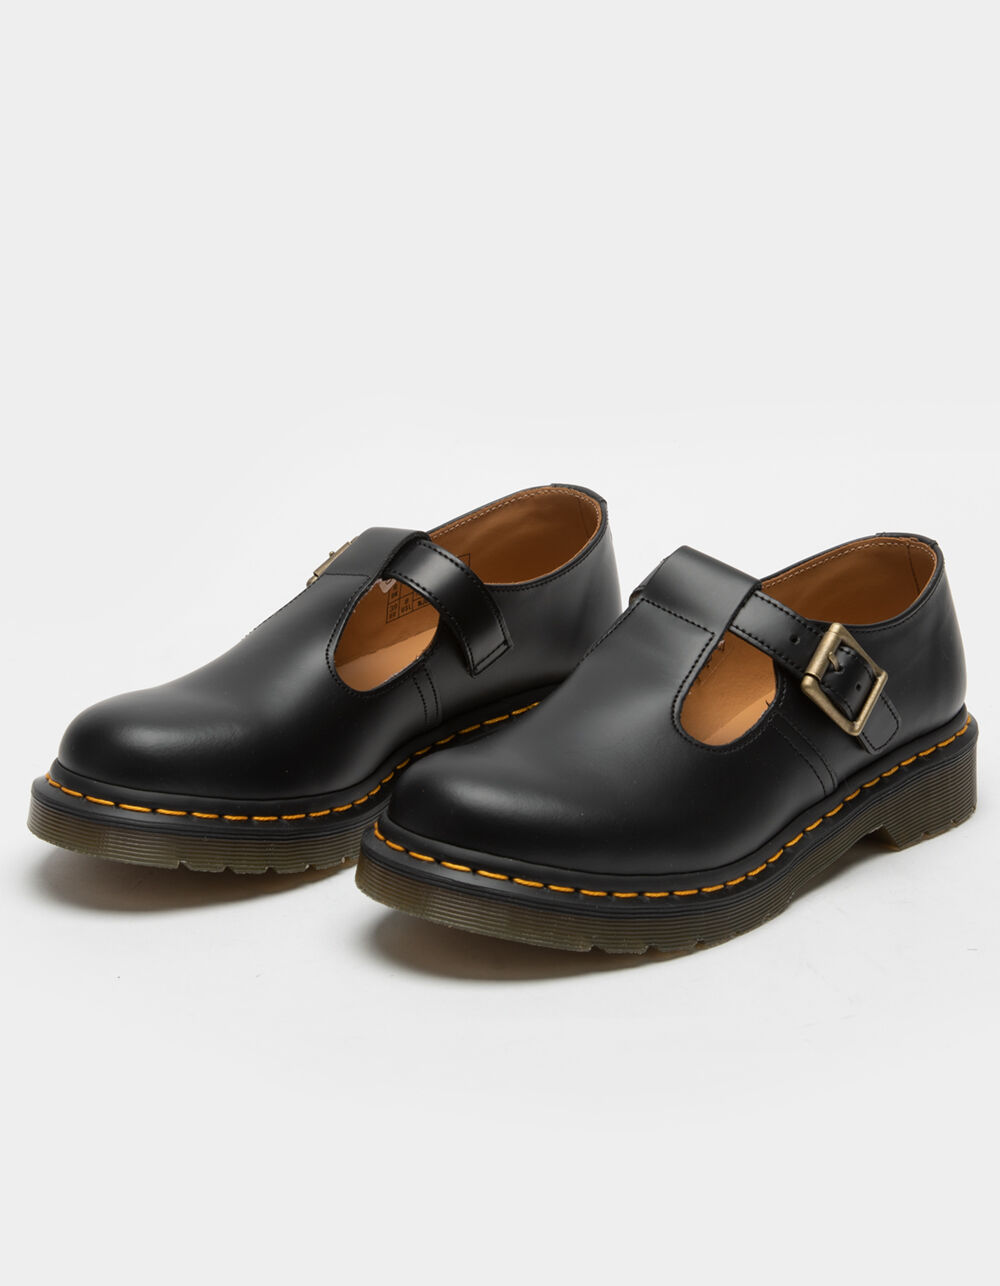 DR. MARTENS Polley Womens Shoes - BLACK | Tillys